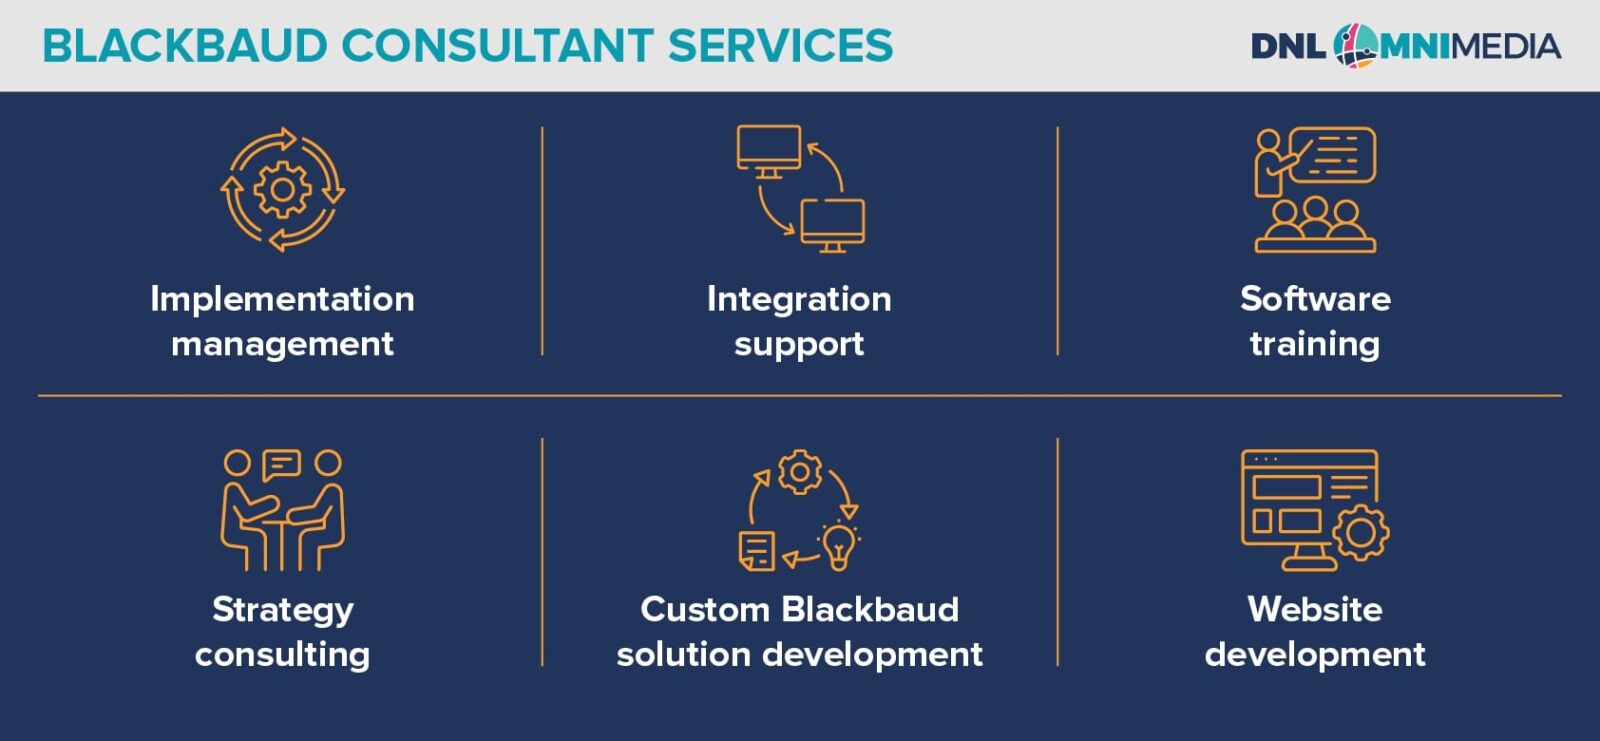 This image lists some of the services Blackbaud consultants can provide, which are explained in the text below.